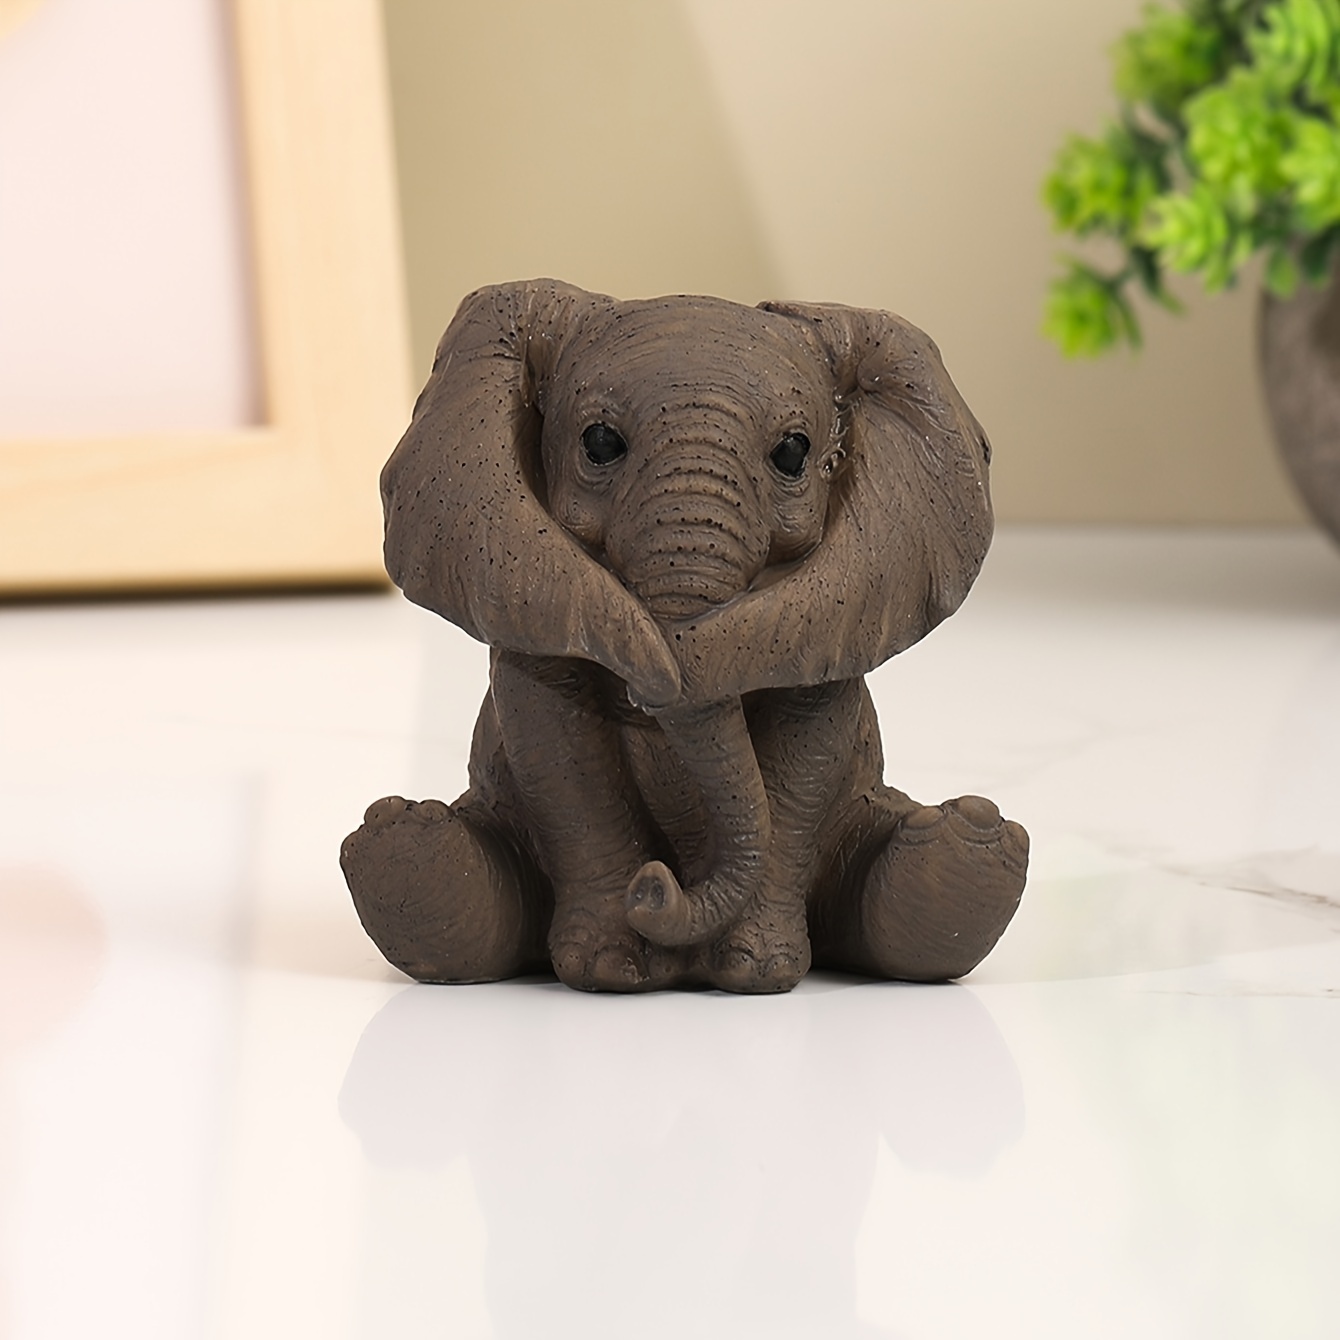 

1pc Adorable Sitting Elephant Figurine, Resin Craft, 3.15in Rustic Brown Collectible Ornament, Home & Office Desk Decor, Animal Statue